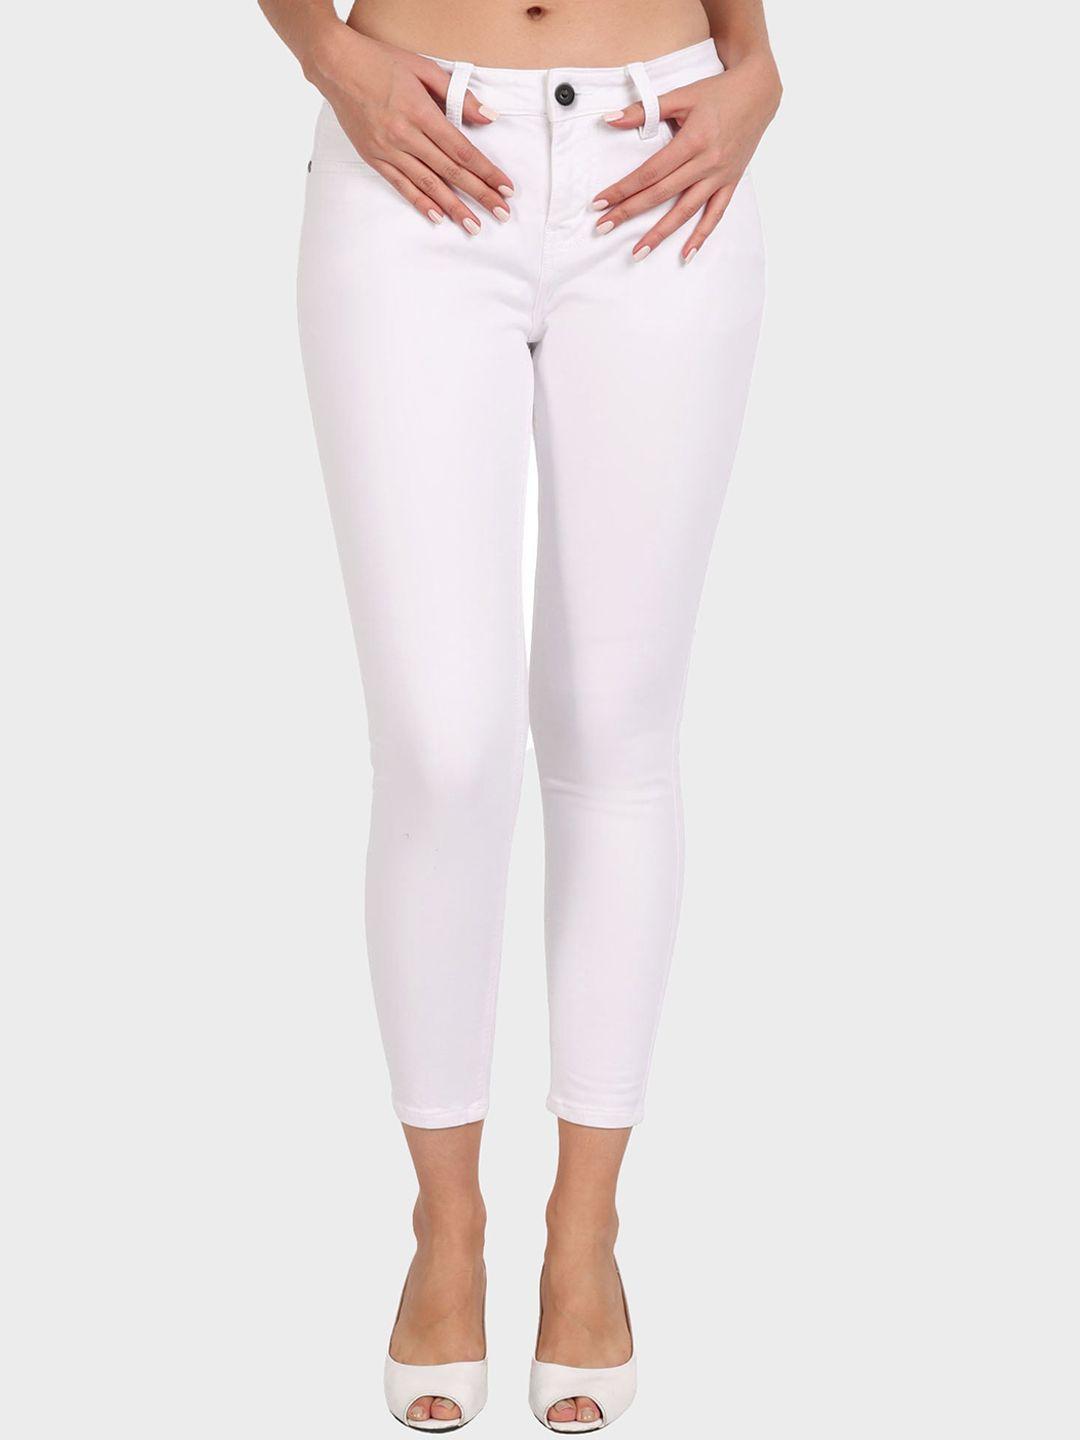 mast-&-harbour-women-white-skinny-fit-stretchable-jeans